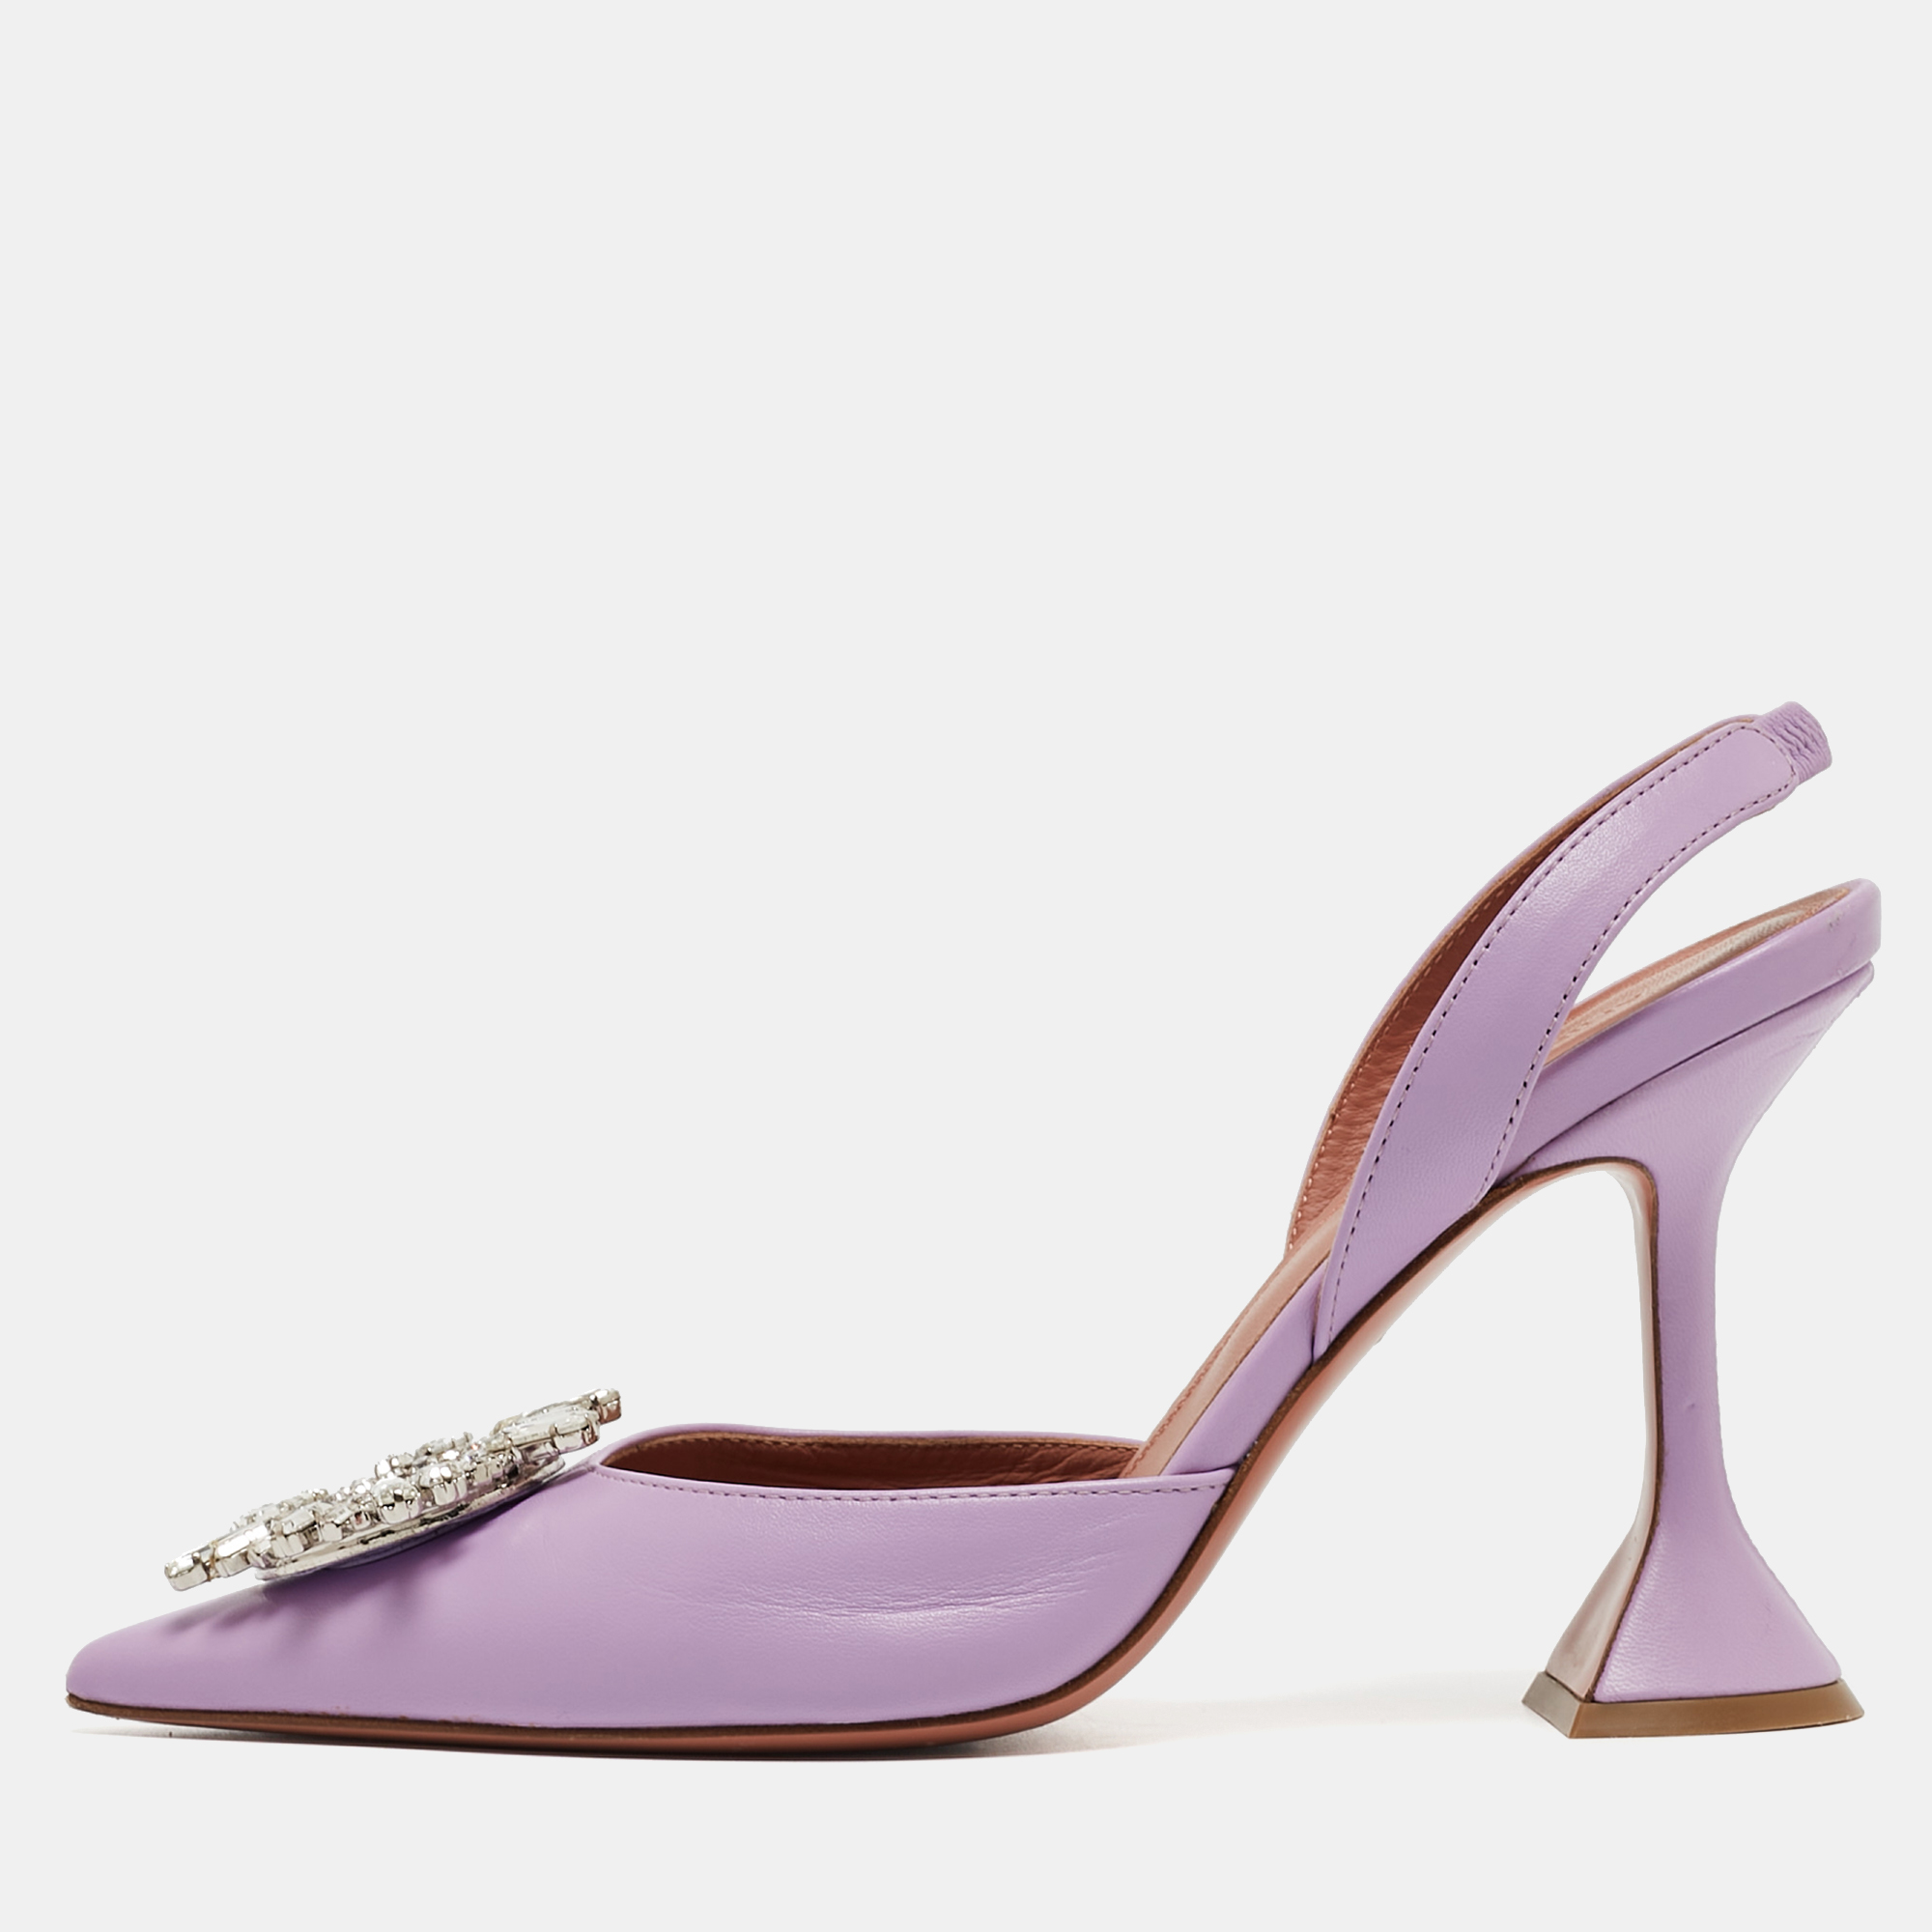 The Amina Muaddi Begum pumps are striking high heeled shoes. They feature transparent blue PVC uppers a pointed toe and a sculpted heel with a signature flared design. These pumps exude modern elegance combining transparency with a bold pop of purple for a unique and stylish look.